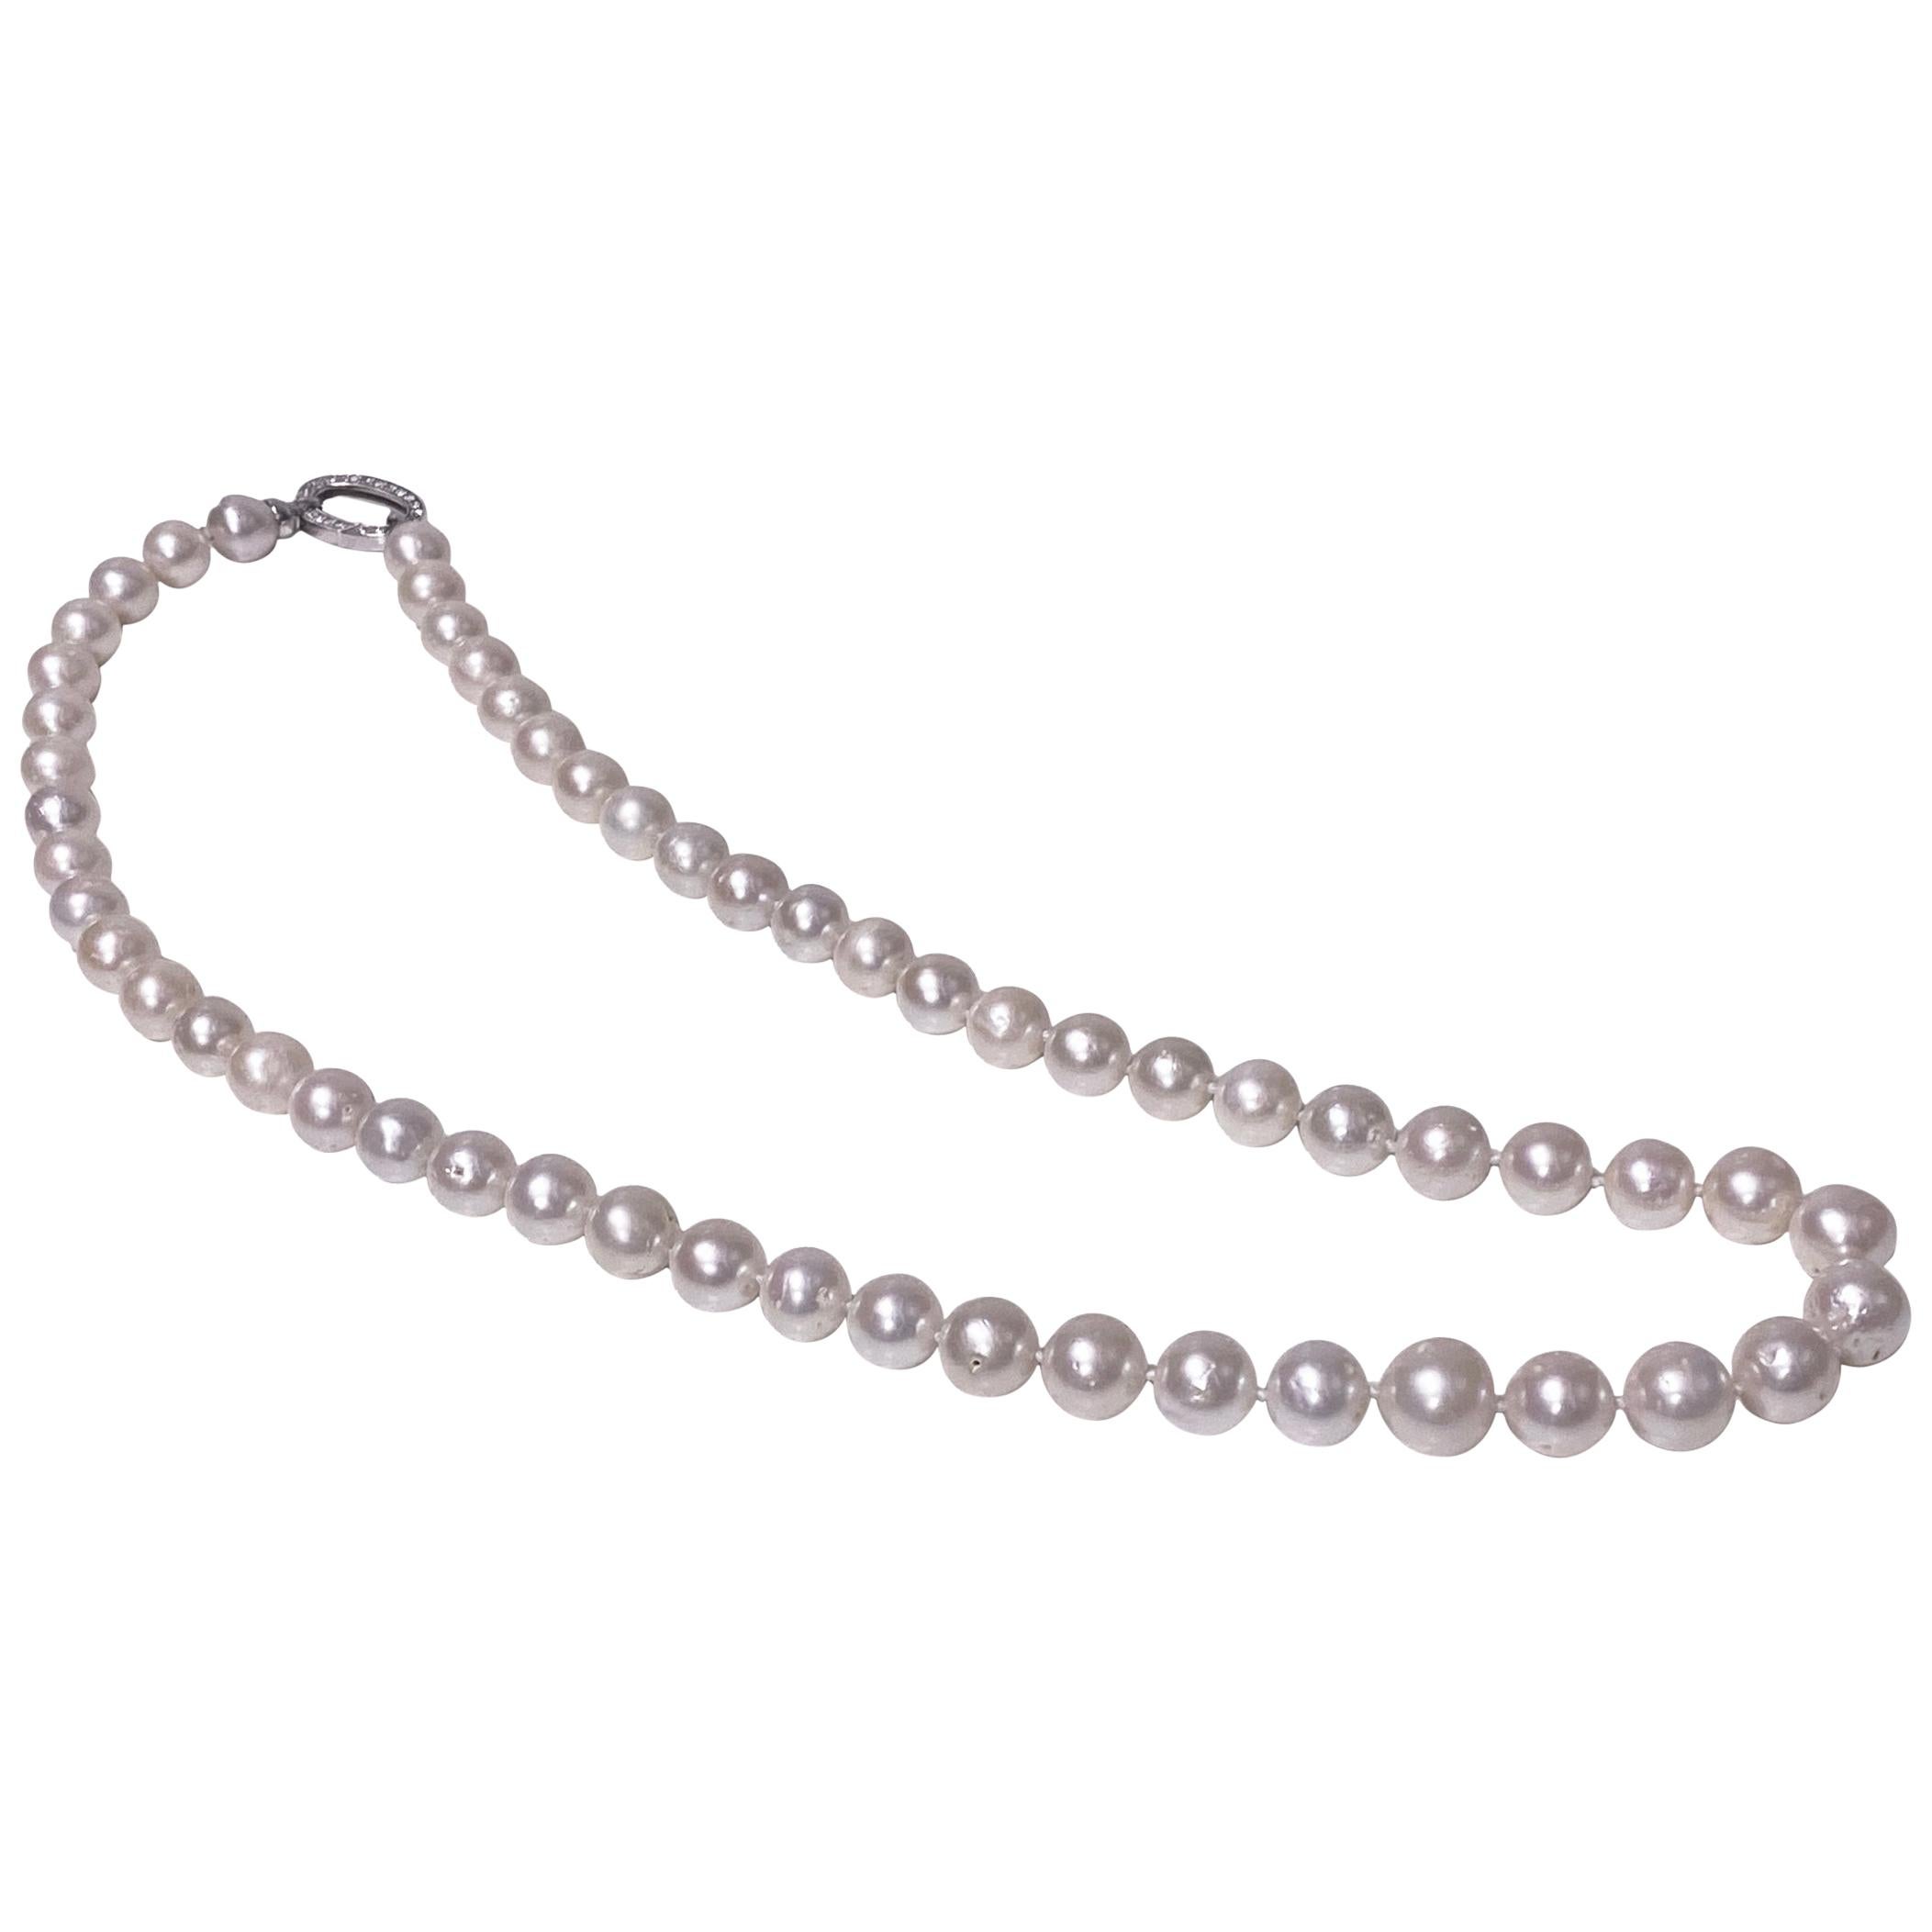 Strand of Cultured Fresh Water Pearl Necklace